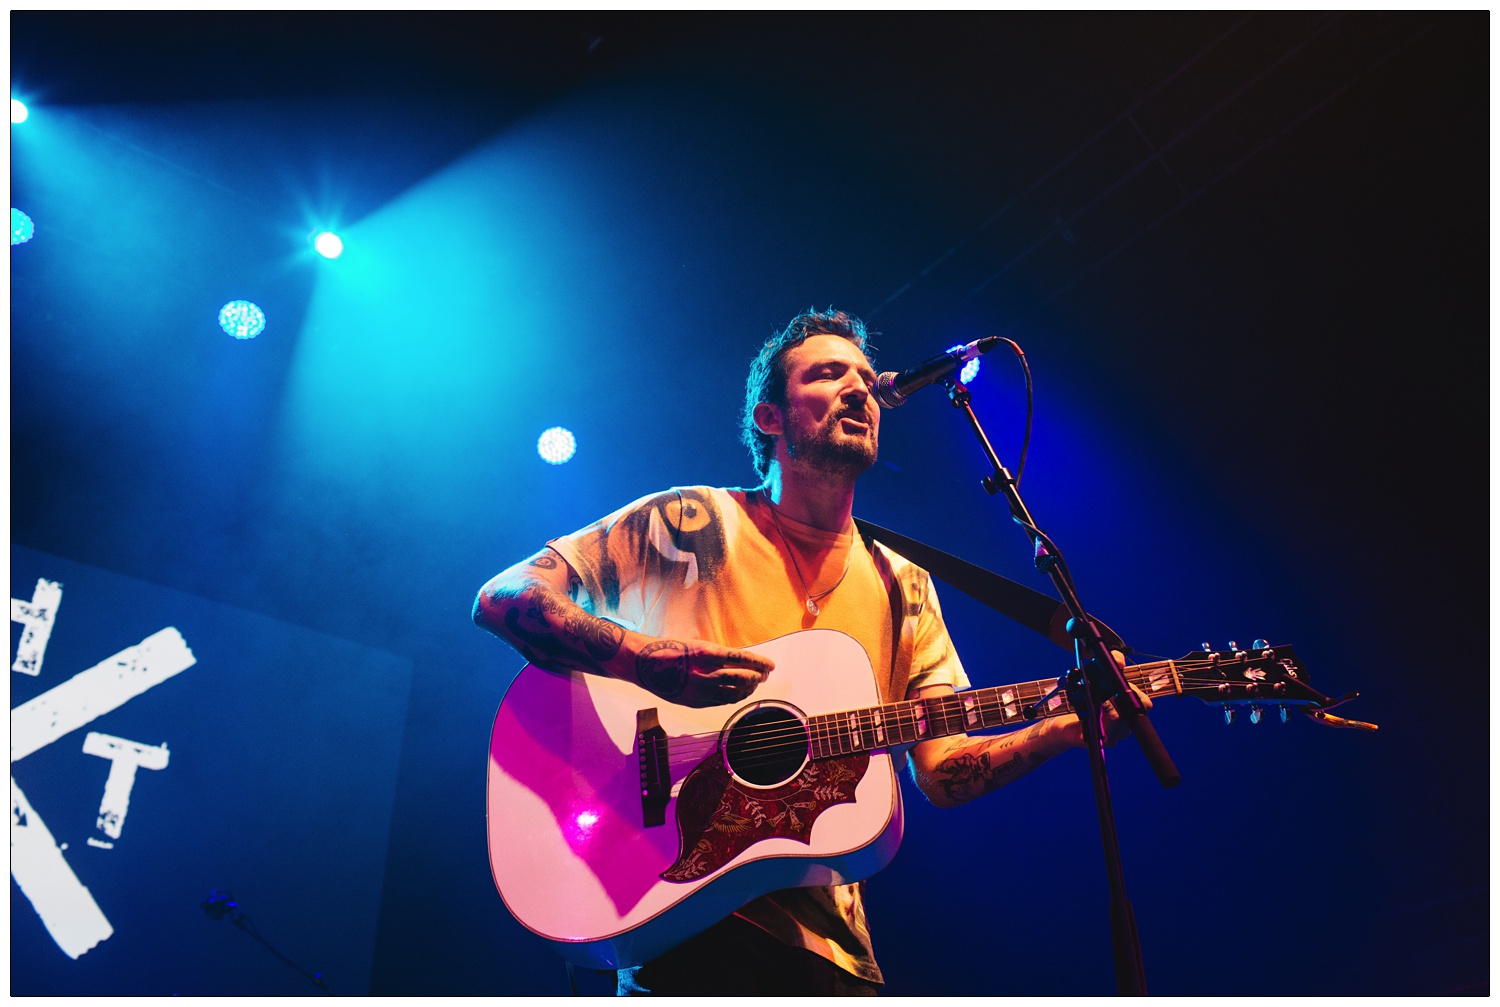 Frank Turner on stage performing at A Peaceful Noise